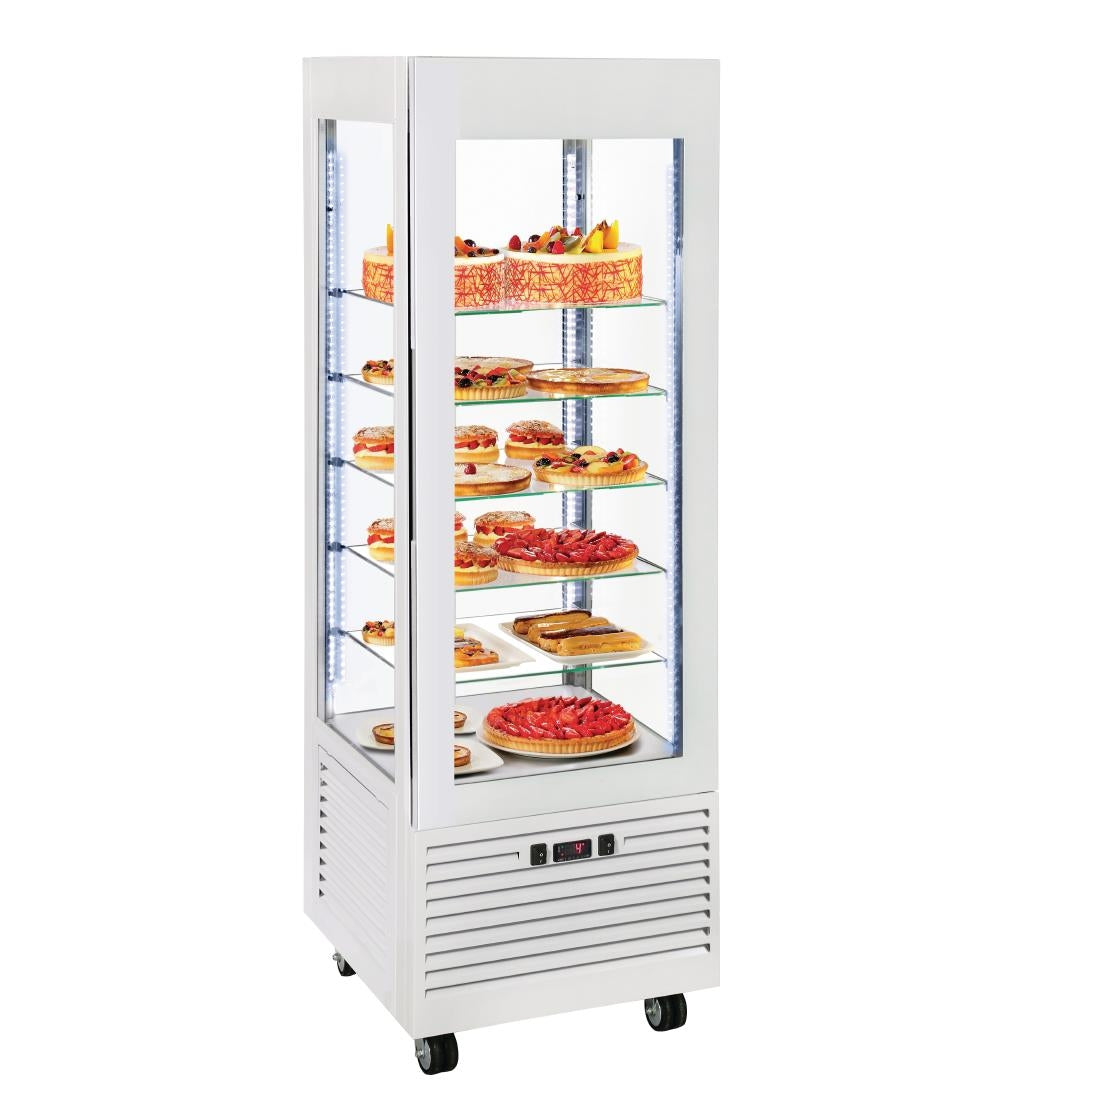 DT735 Roller Grill Display Fridge with Fixed Shelves White JD Catering Equipment Solutions Ltd